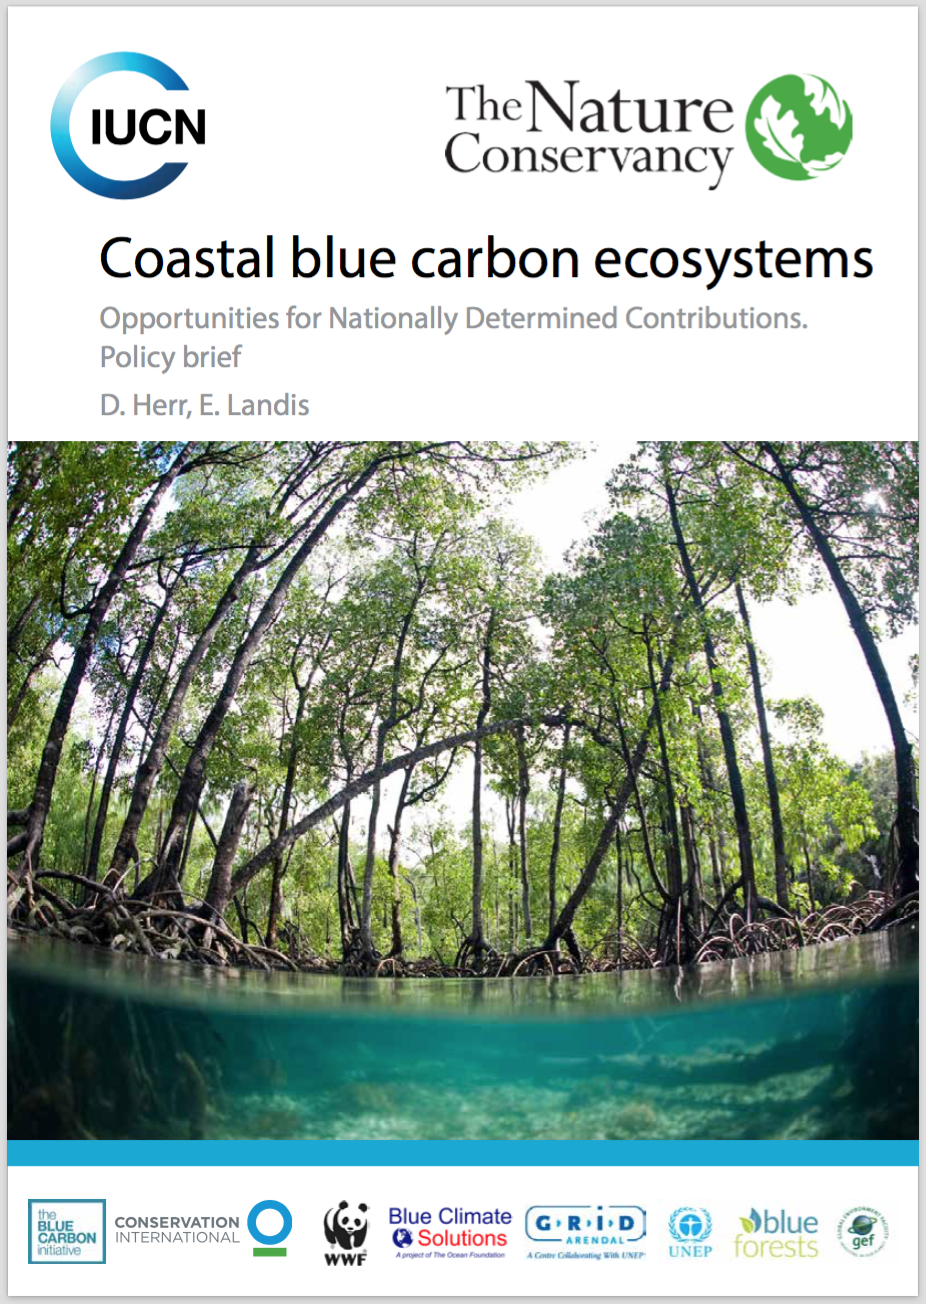 Coastal and island countries have an opportunity to take their blue carbon ecosystems into account when considering their national level climate actions.